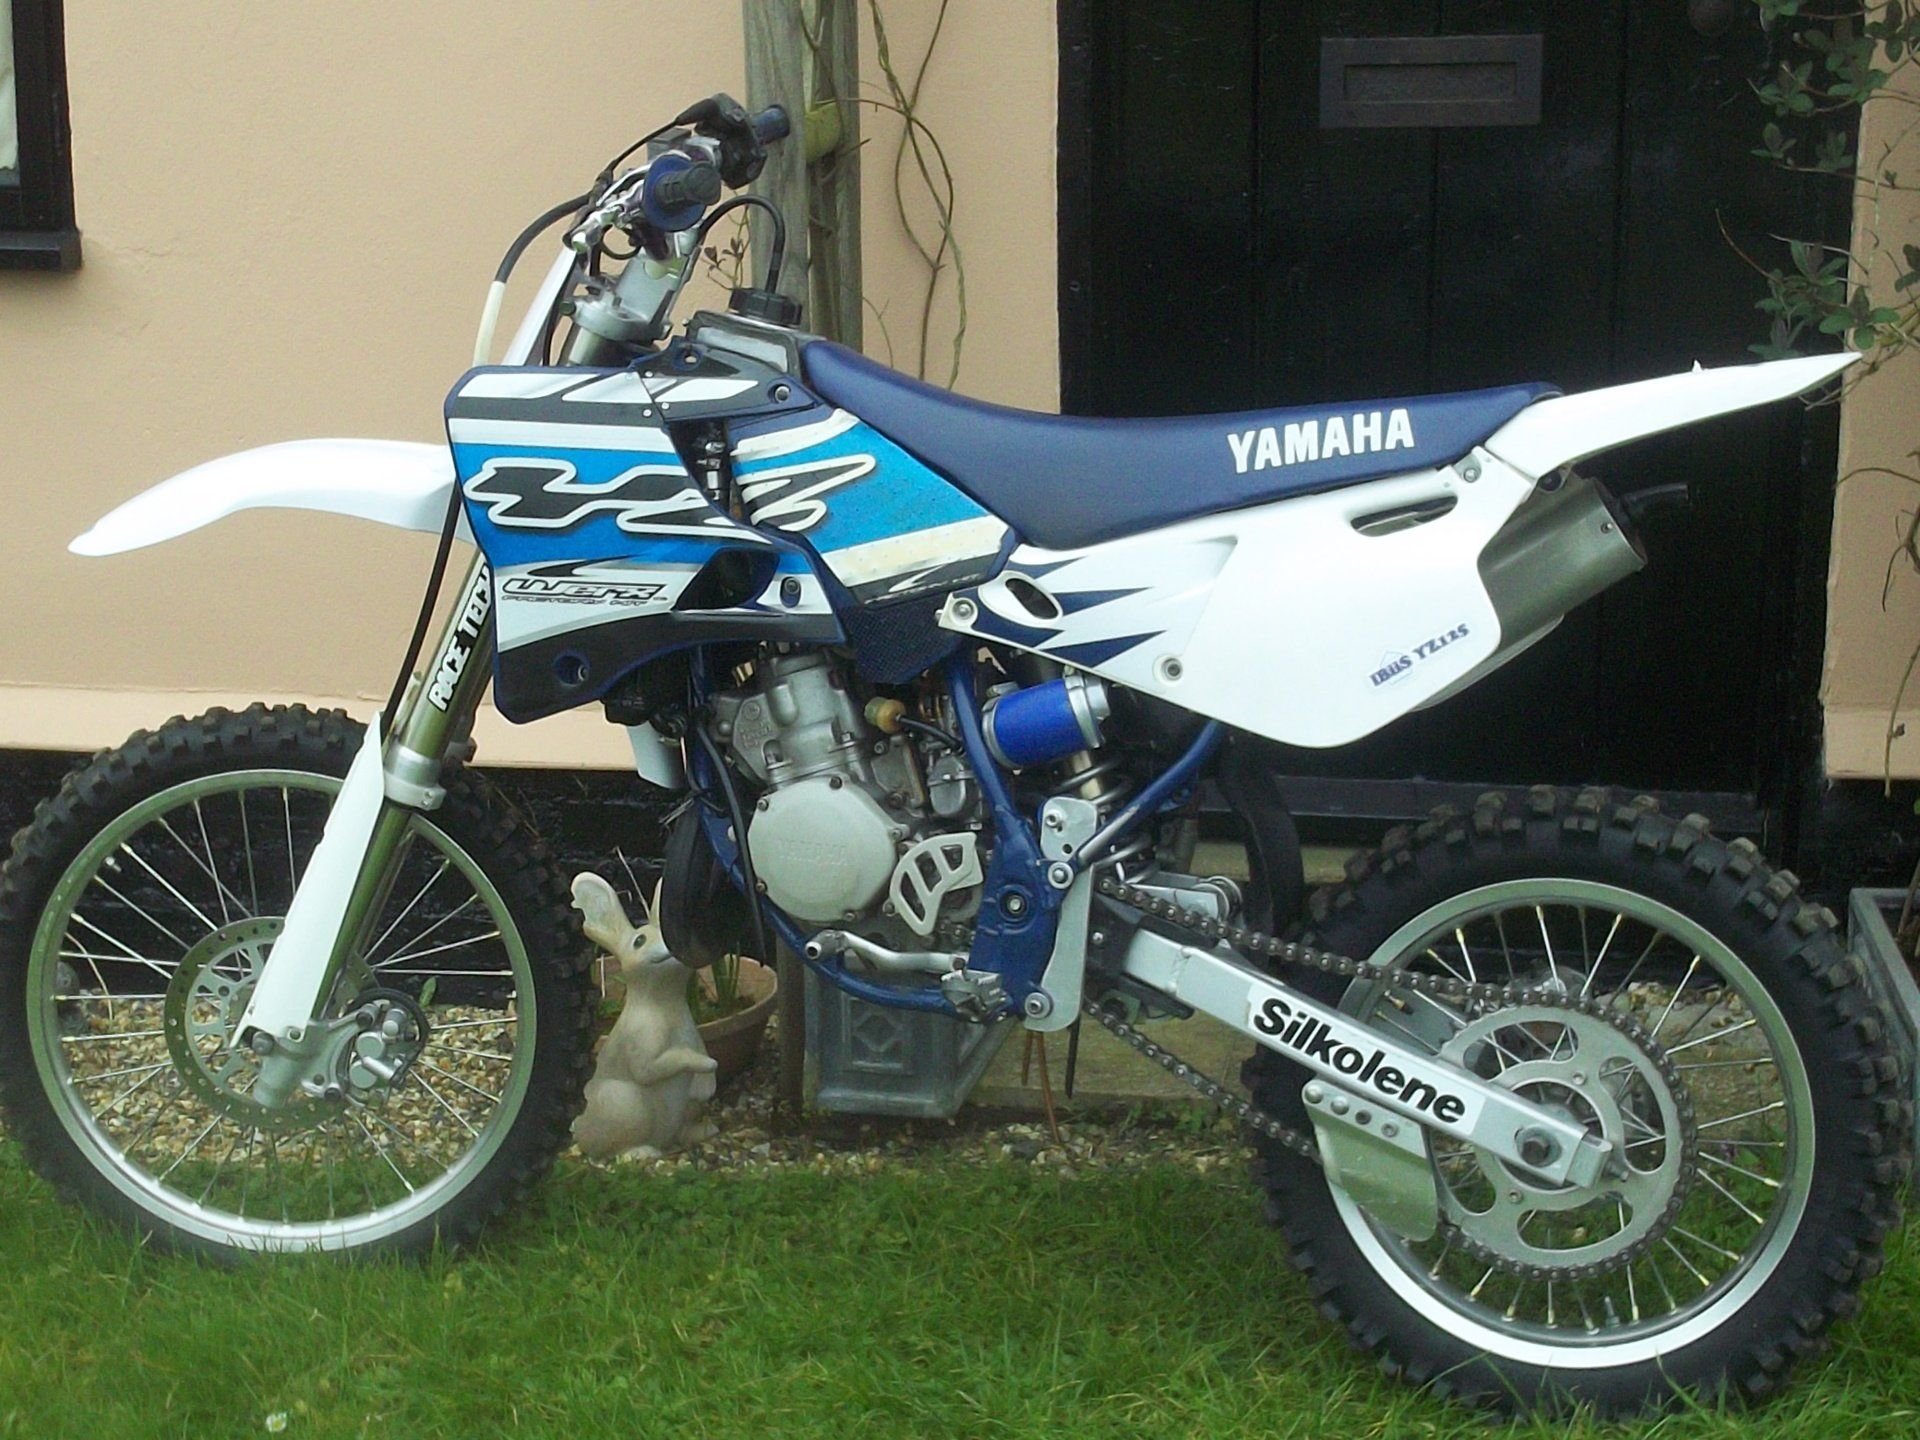 IBiiS YZ125 - Yz125 engine in YZ80 chassis